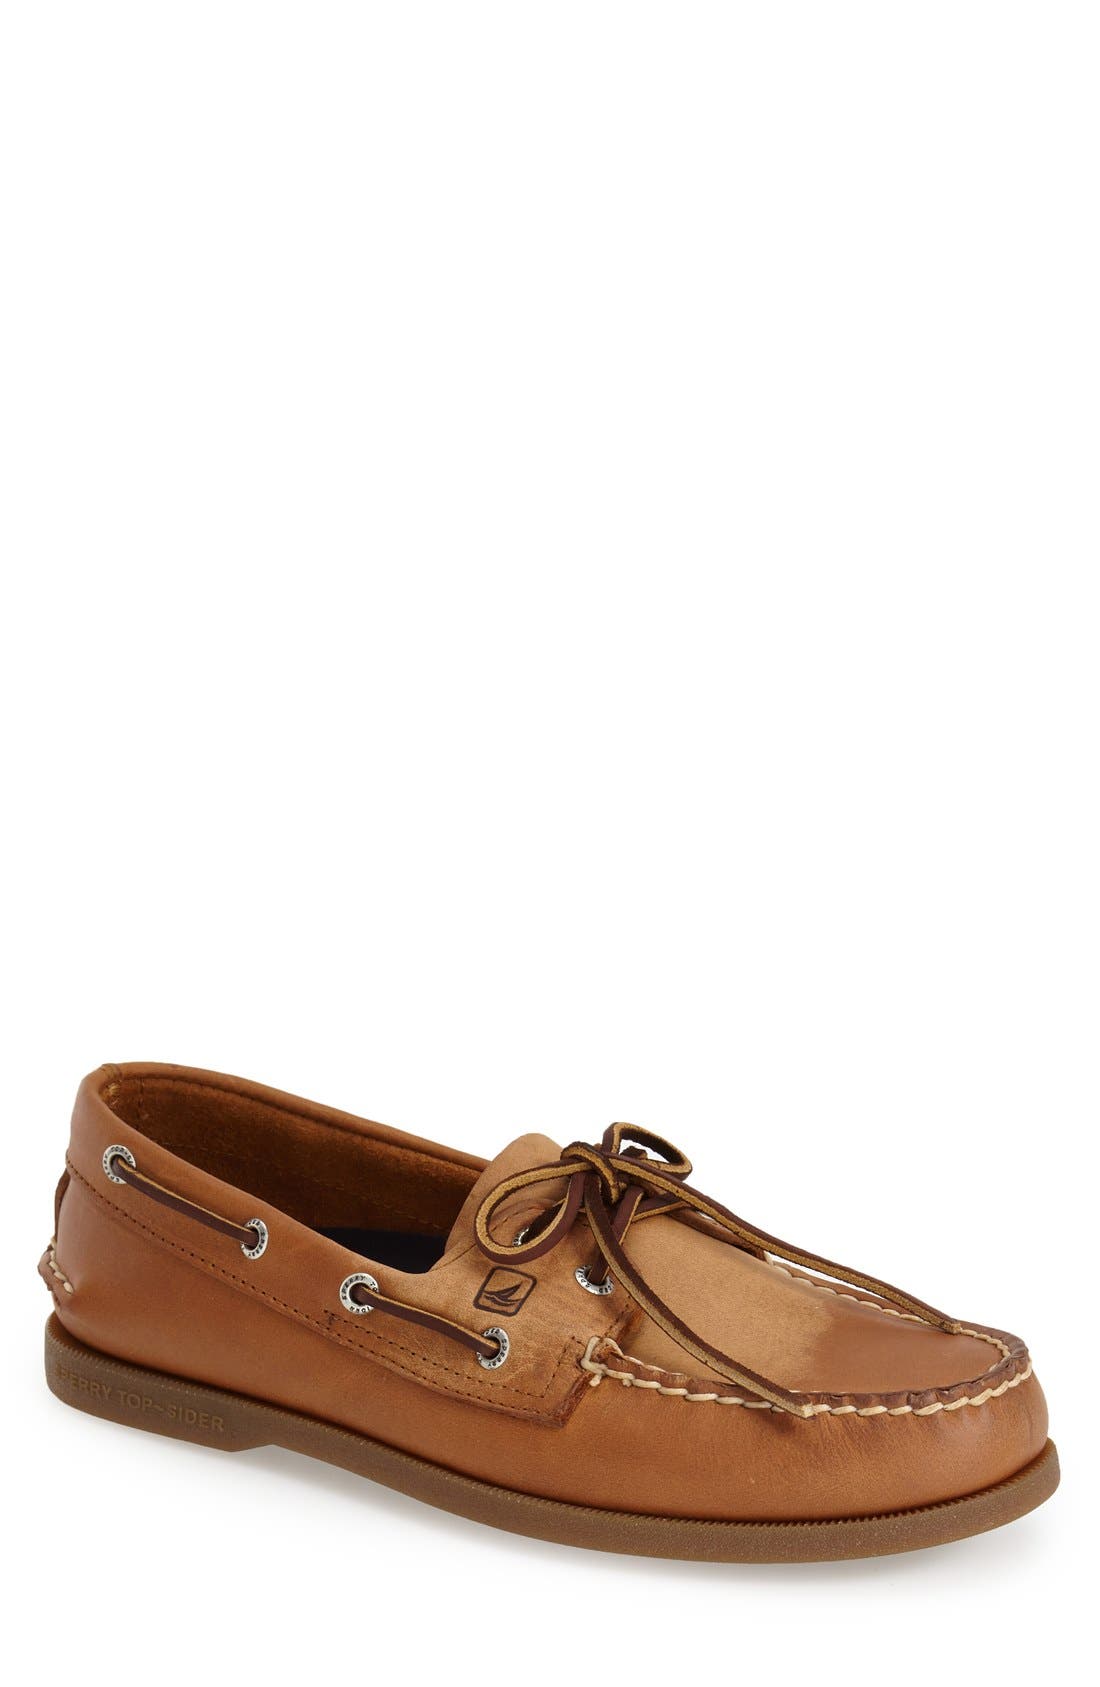 sperry loafers womens sale